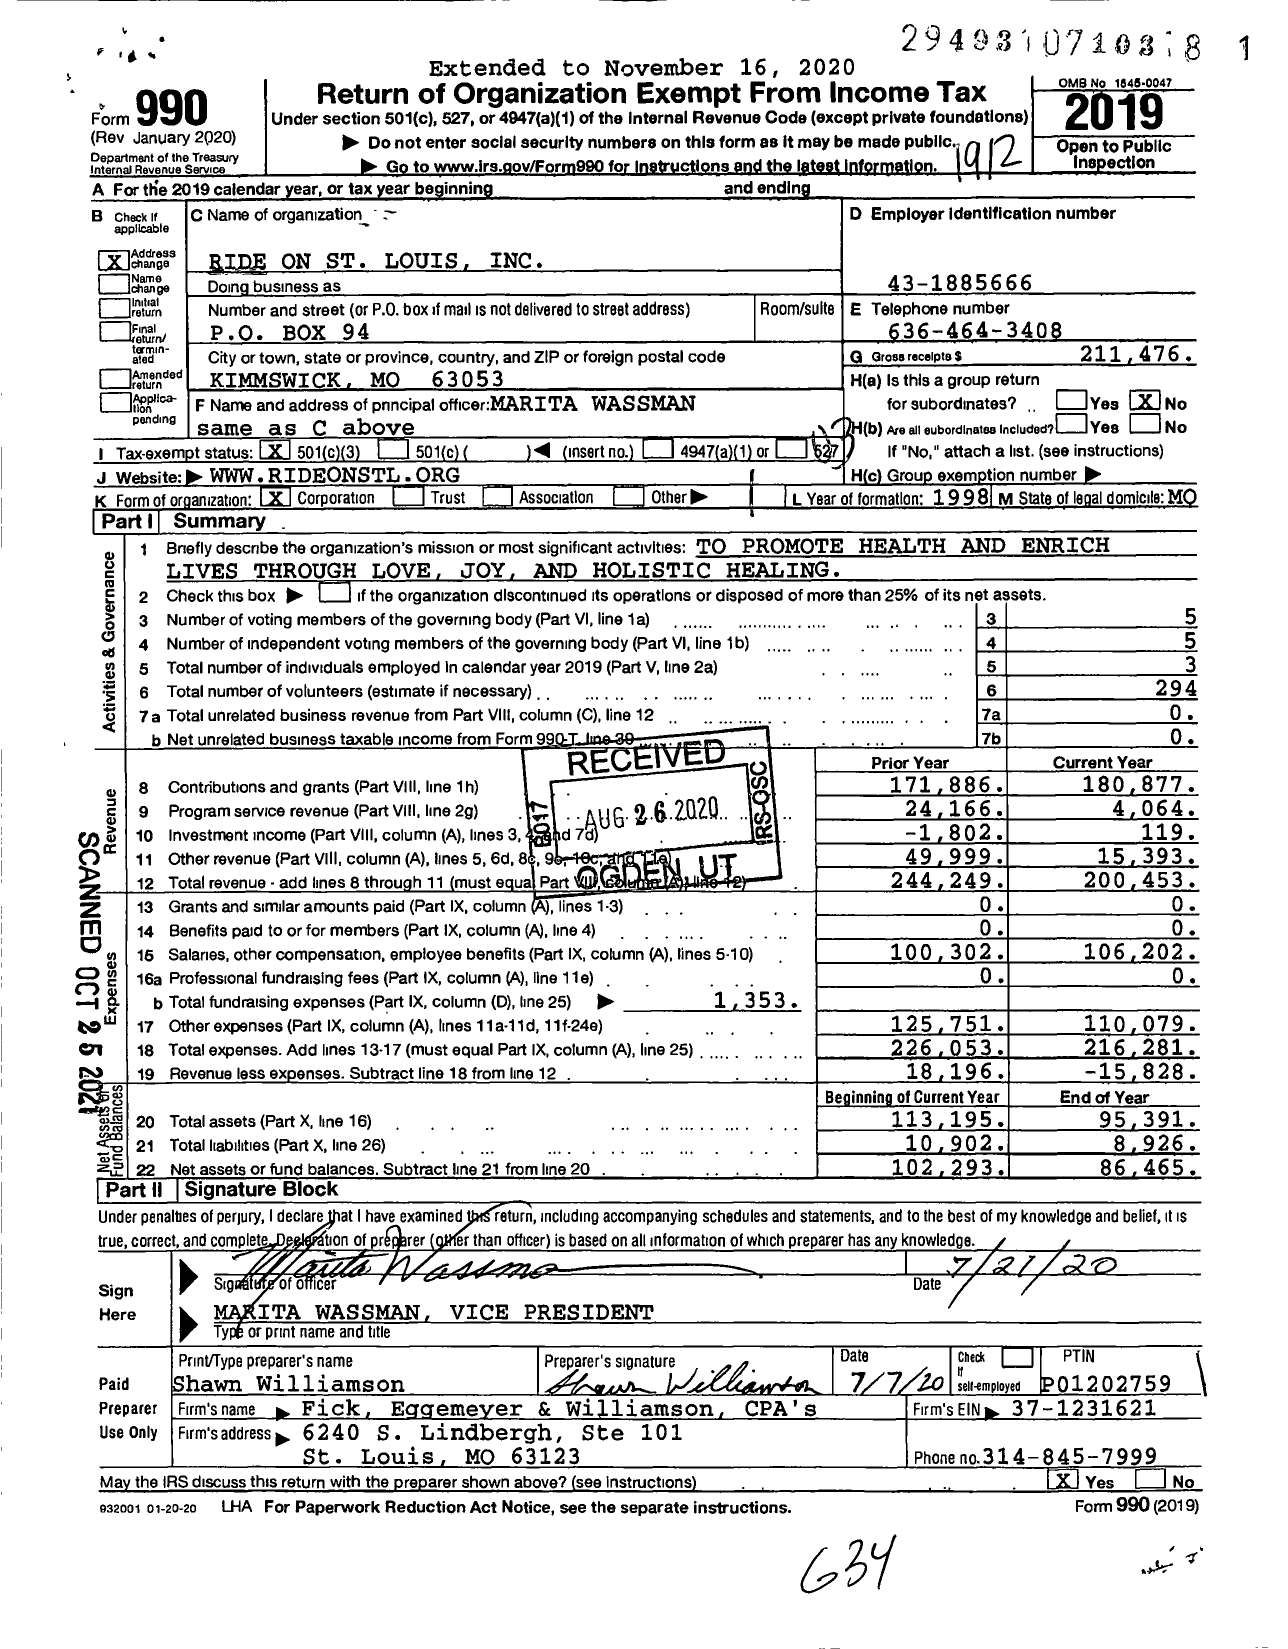 Image of first page of 2019 Form 990 for Ride on St Louis